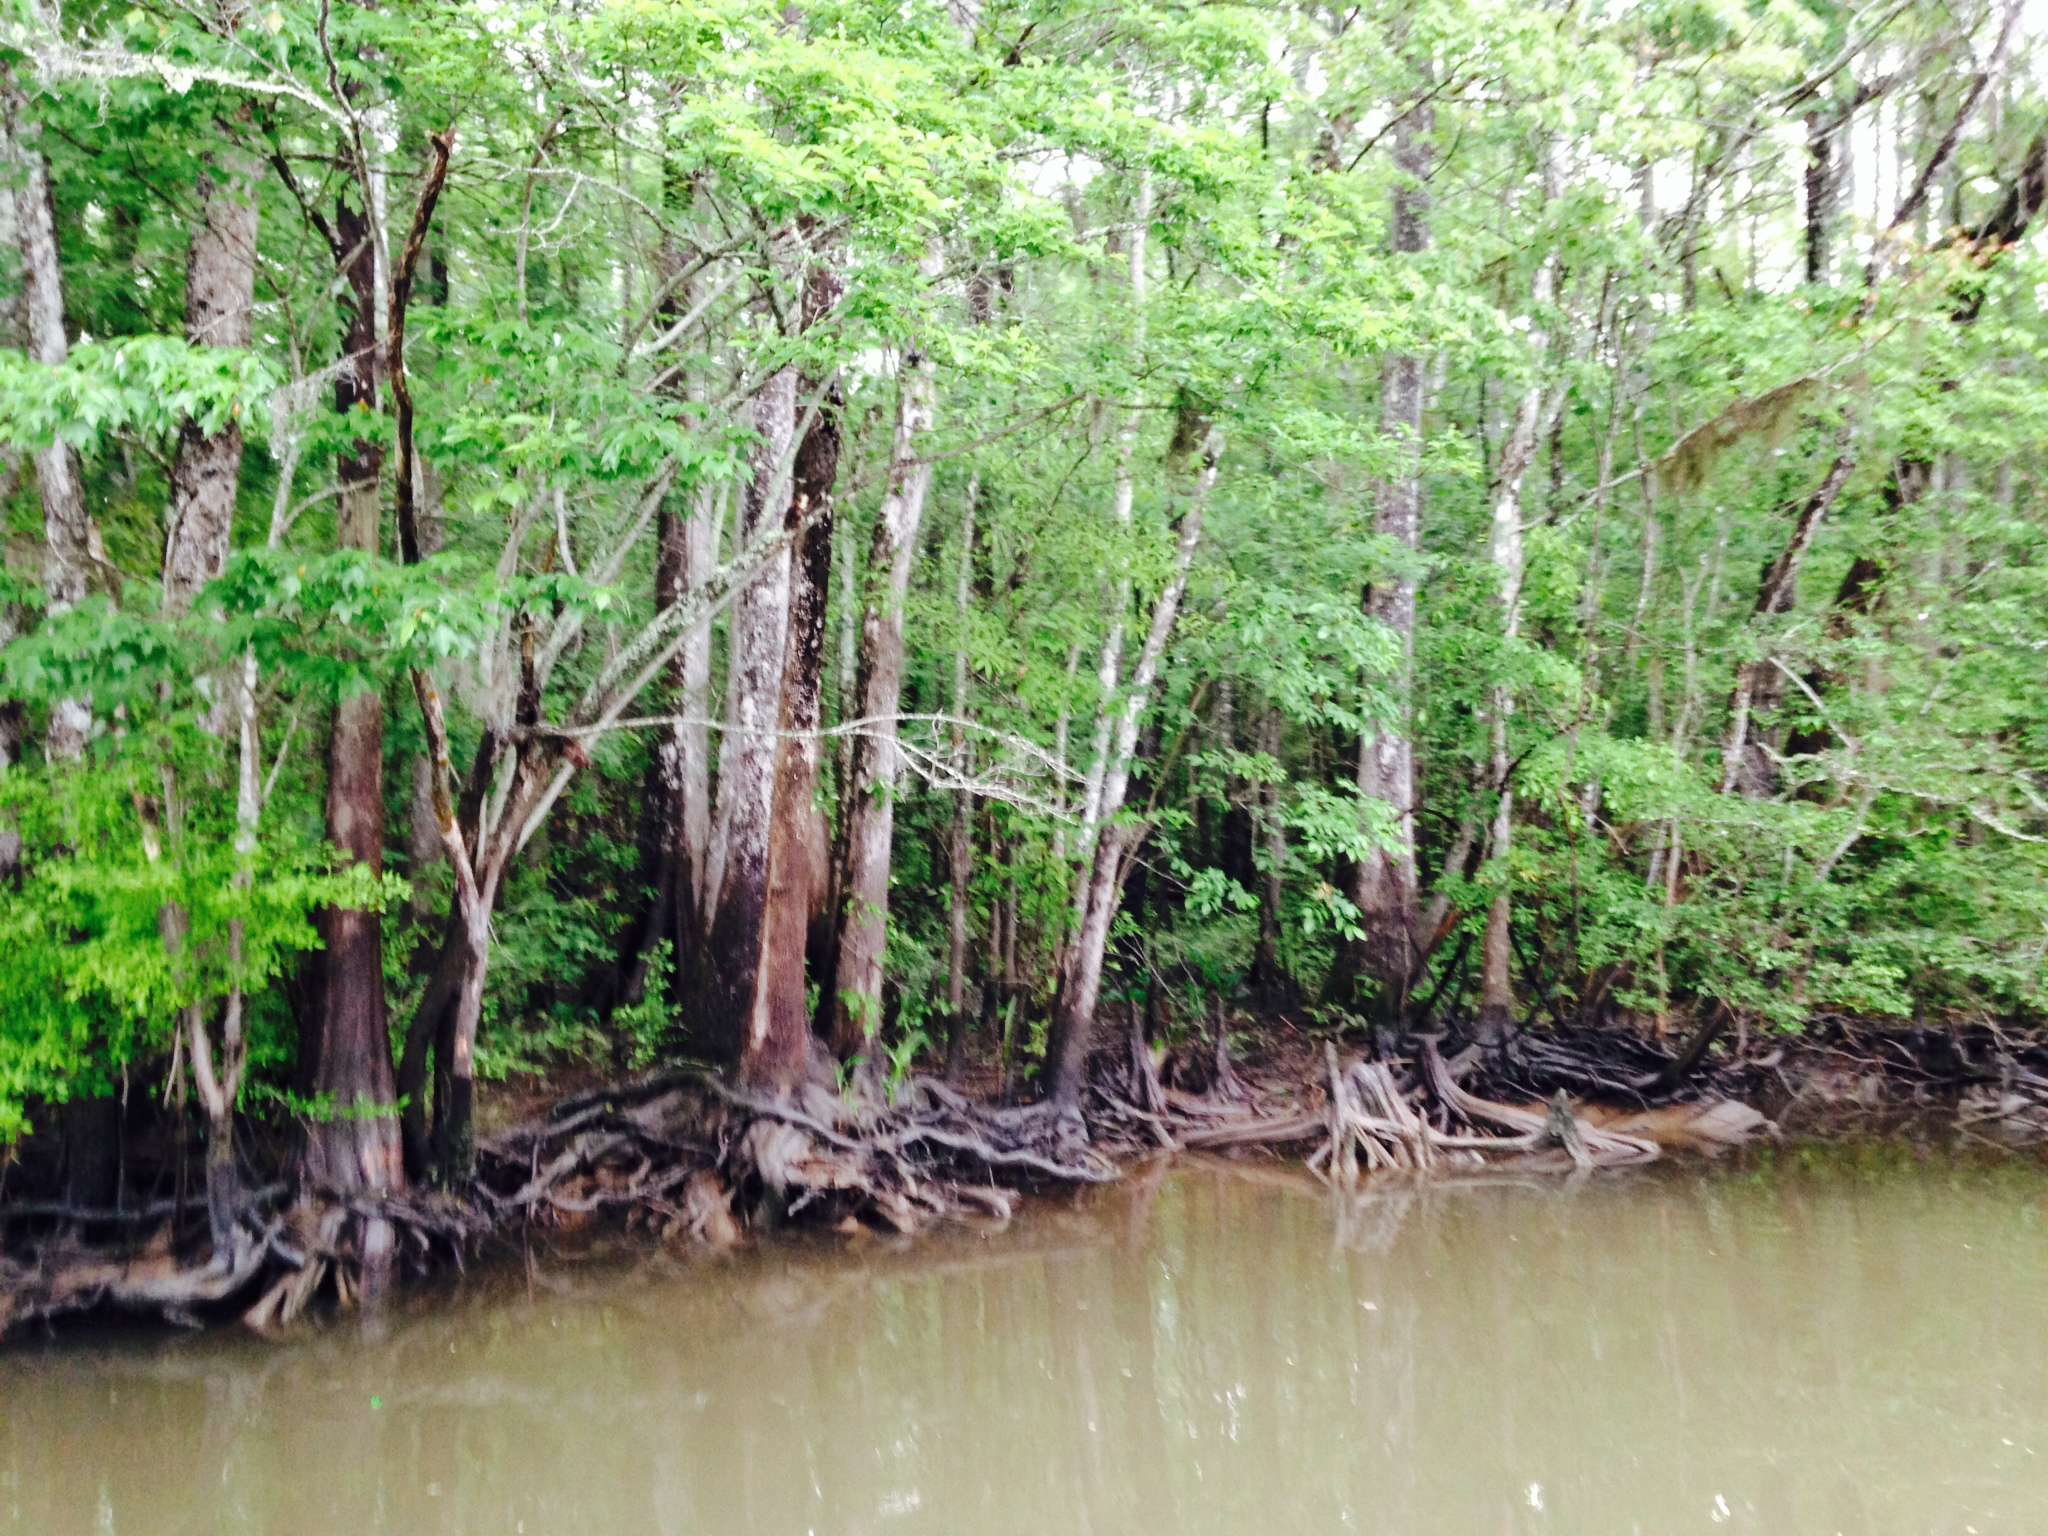 How many bass are near those twisted old roots?